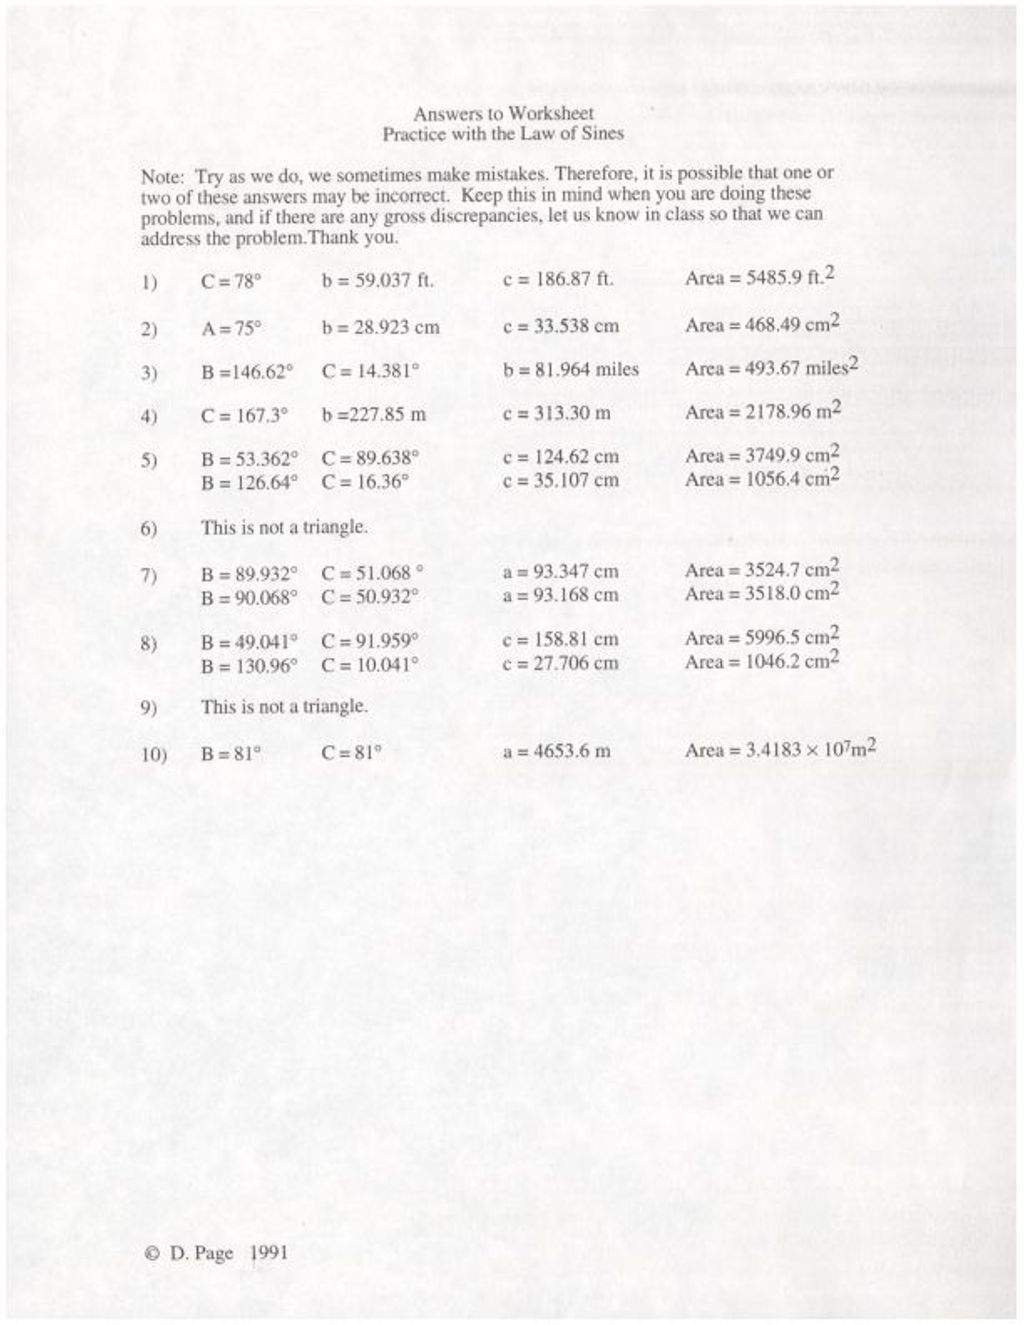 Miniature of Answers to the Worksheet Practice with the Law of Sines (1991)